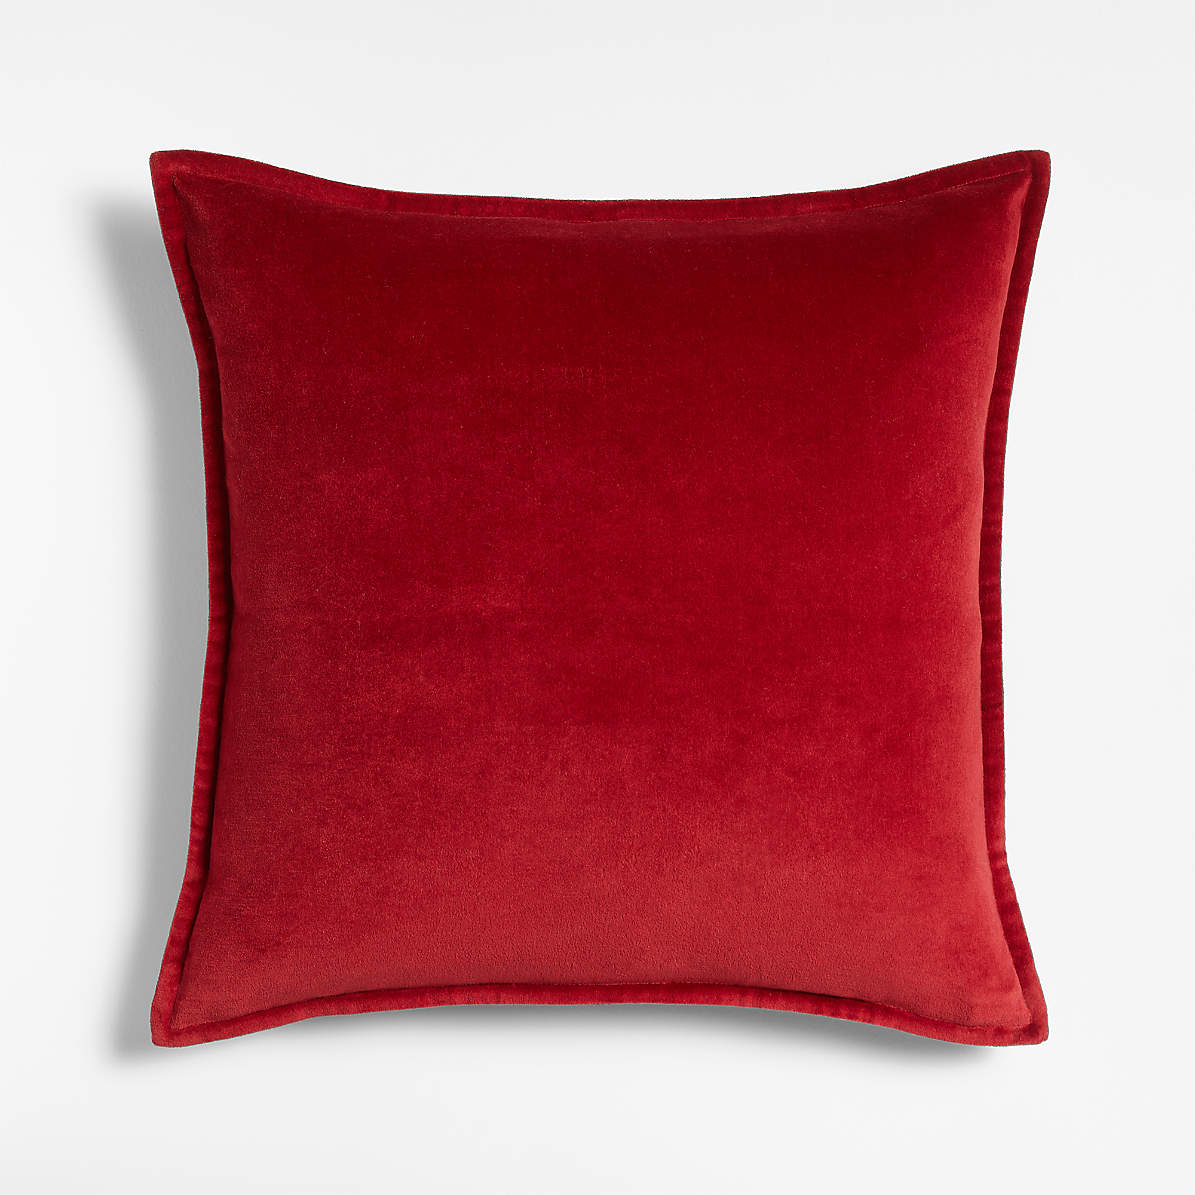 Red Organic Washed Cotton Velvet Decorative Throw Pillow Cover + Reviews | Crate